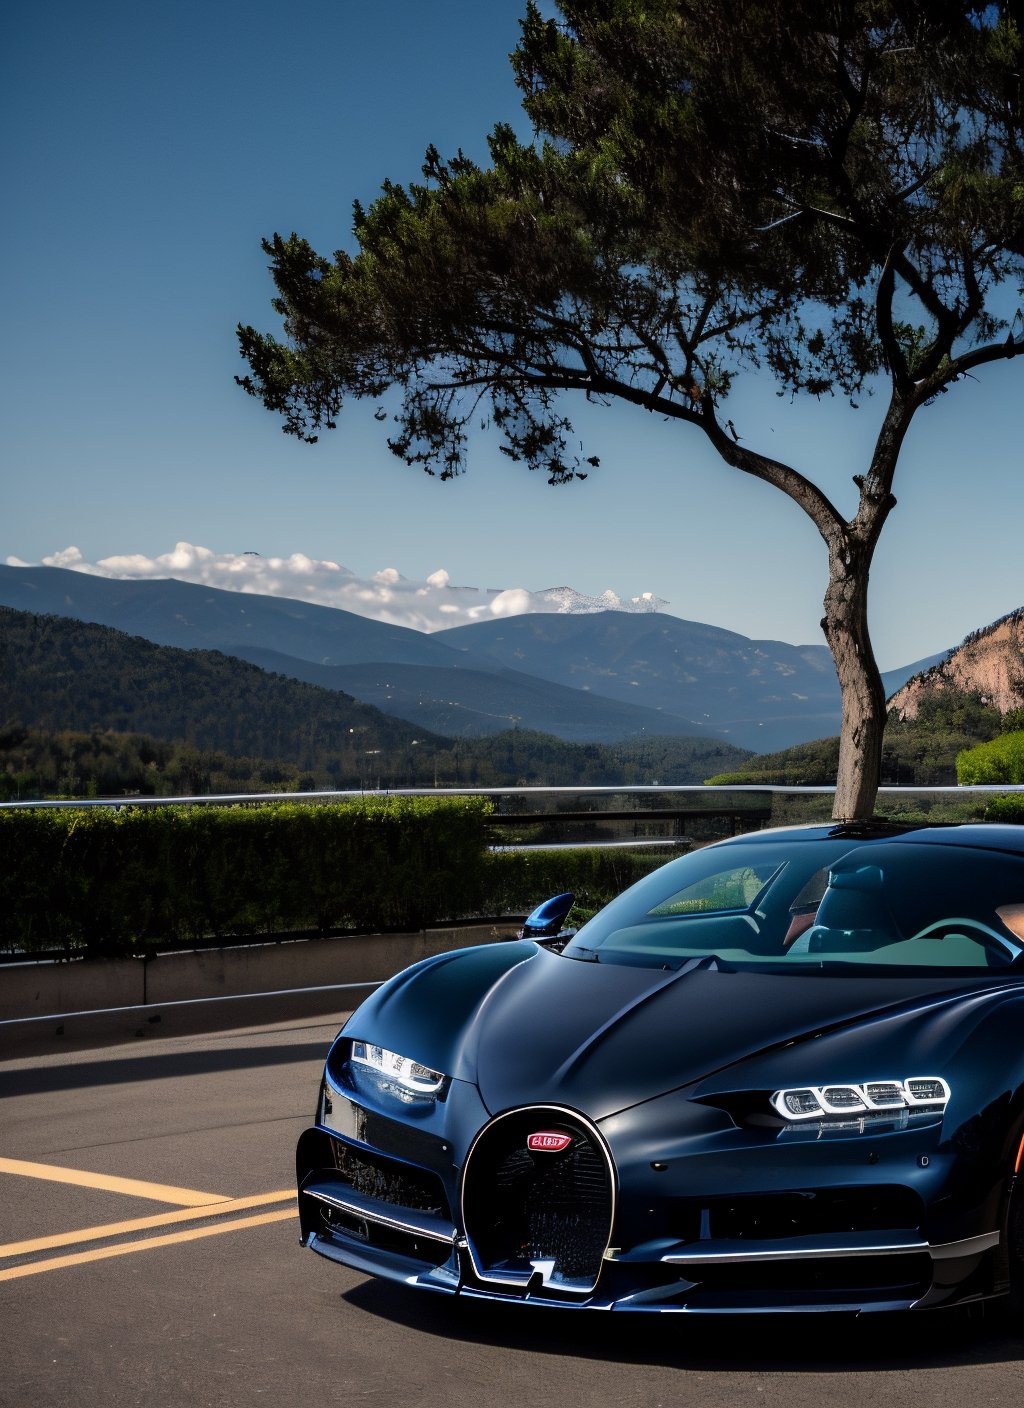 RAW phontograph of bugatti chiron super sport 300+ car, mate carbon color, jet black car, dark sky,cool, asthetic, ,full car in frame, full car picture, drift,highly detaited, 8k, 1000mp,ultra sharp, master peice, realistic,detailed grills, detailed headlights,4k grill, 4k headlights, rich city,